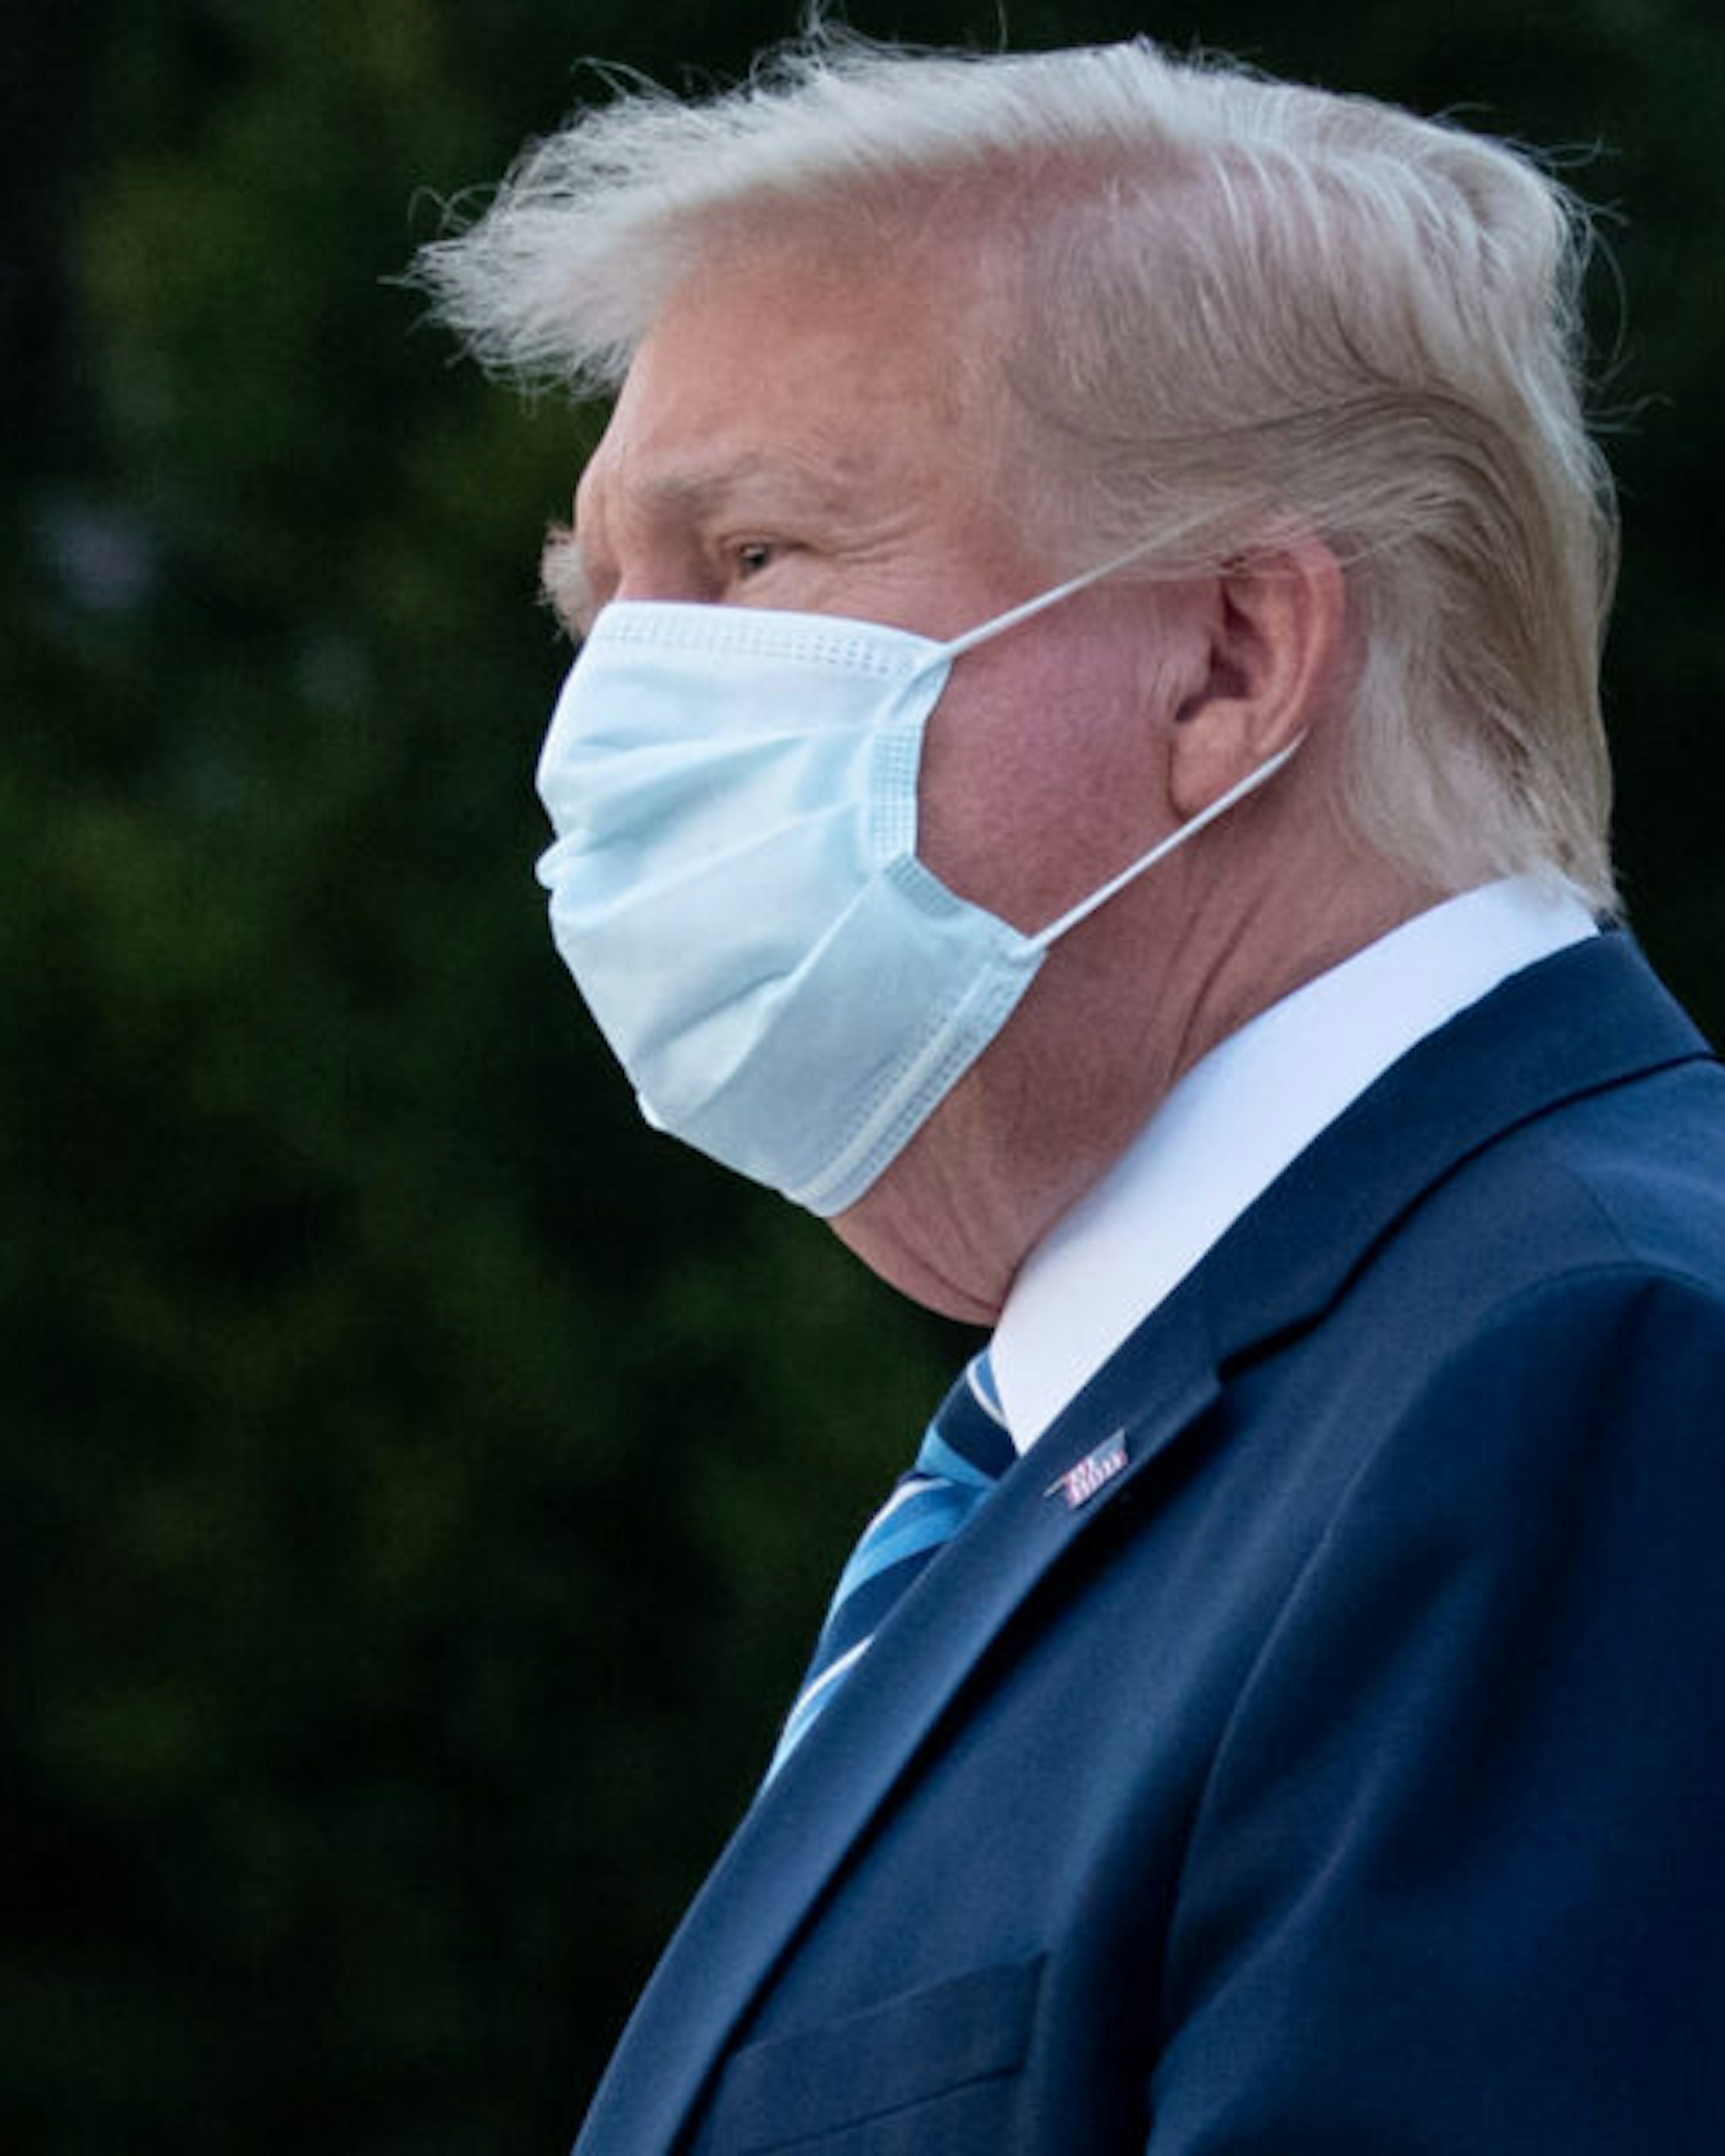 US President Donald Trump wears a facemask as he leaves Walter Reed Medical Center in Bethesda, Maryland heading to Marine One on October 5, 2020, to return to the White House after being discharged. - Trump announced Monday he would be "back on the campaign trail soon", just before returning to the White House from a hospital where he was being treated for Covid-19. (Photo by SAUL LOEB / AFP)